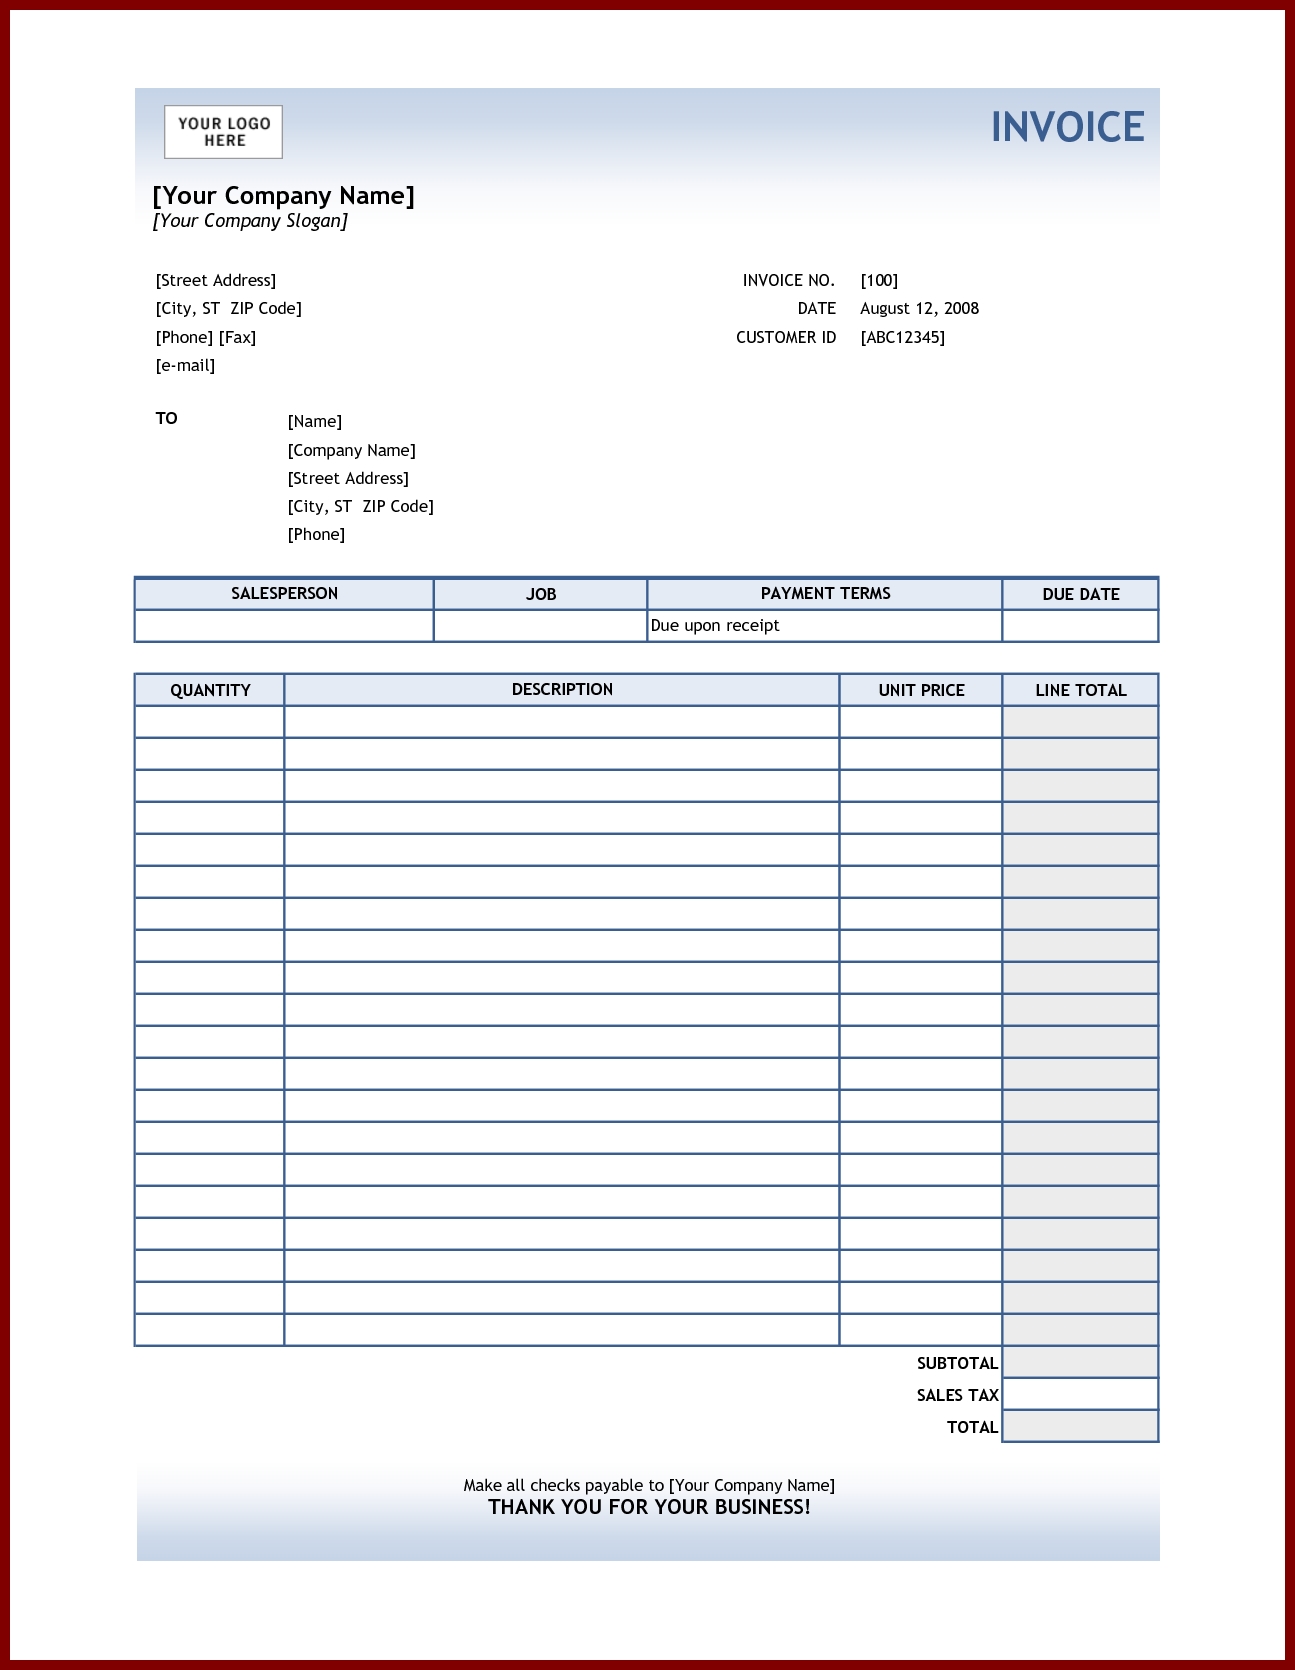 sample invoice excel invoice form excel 11 invoice sample excel invoices in excel